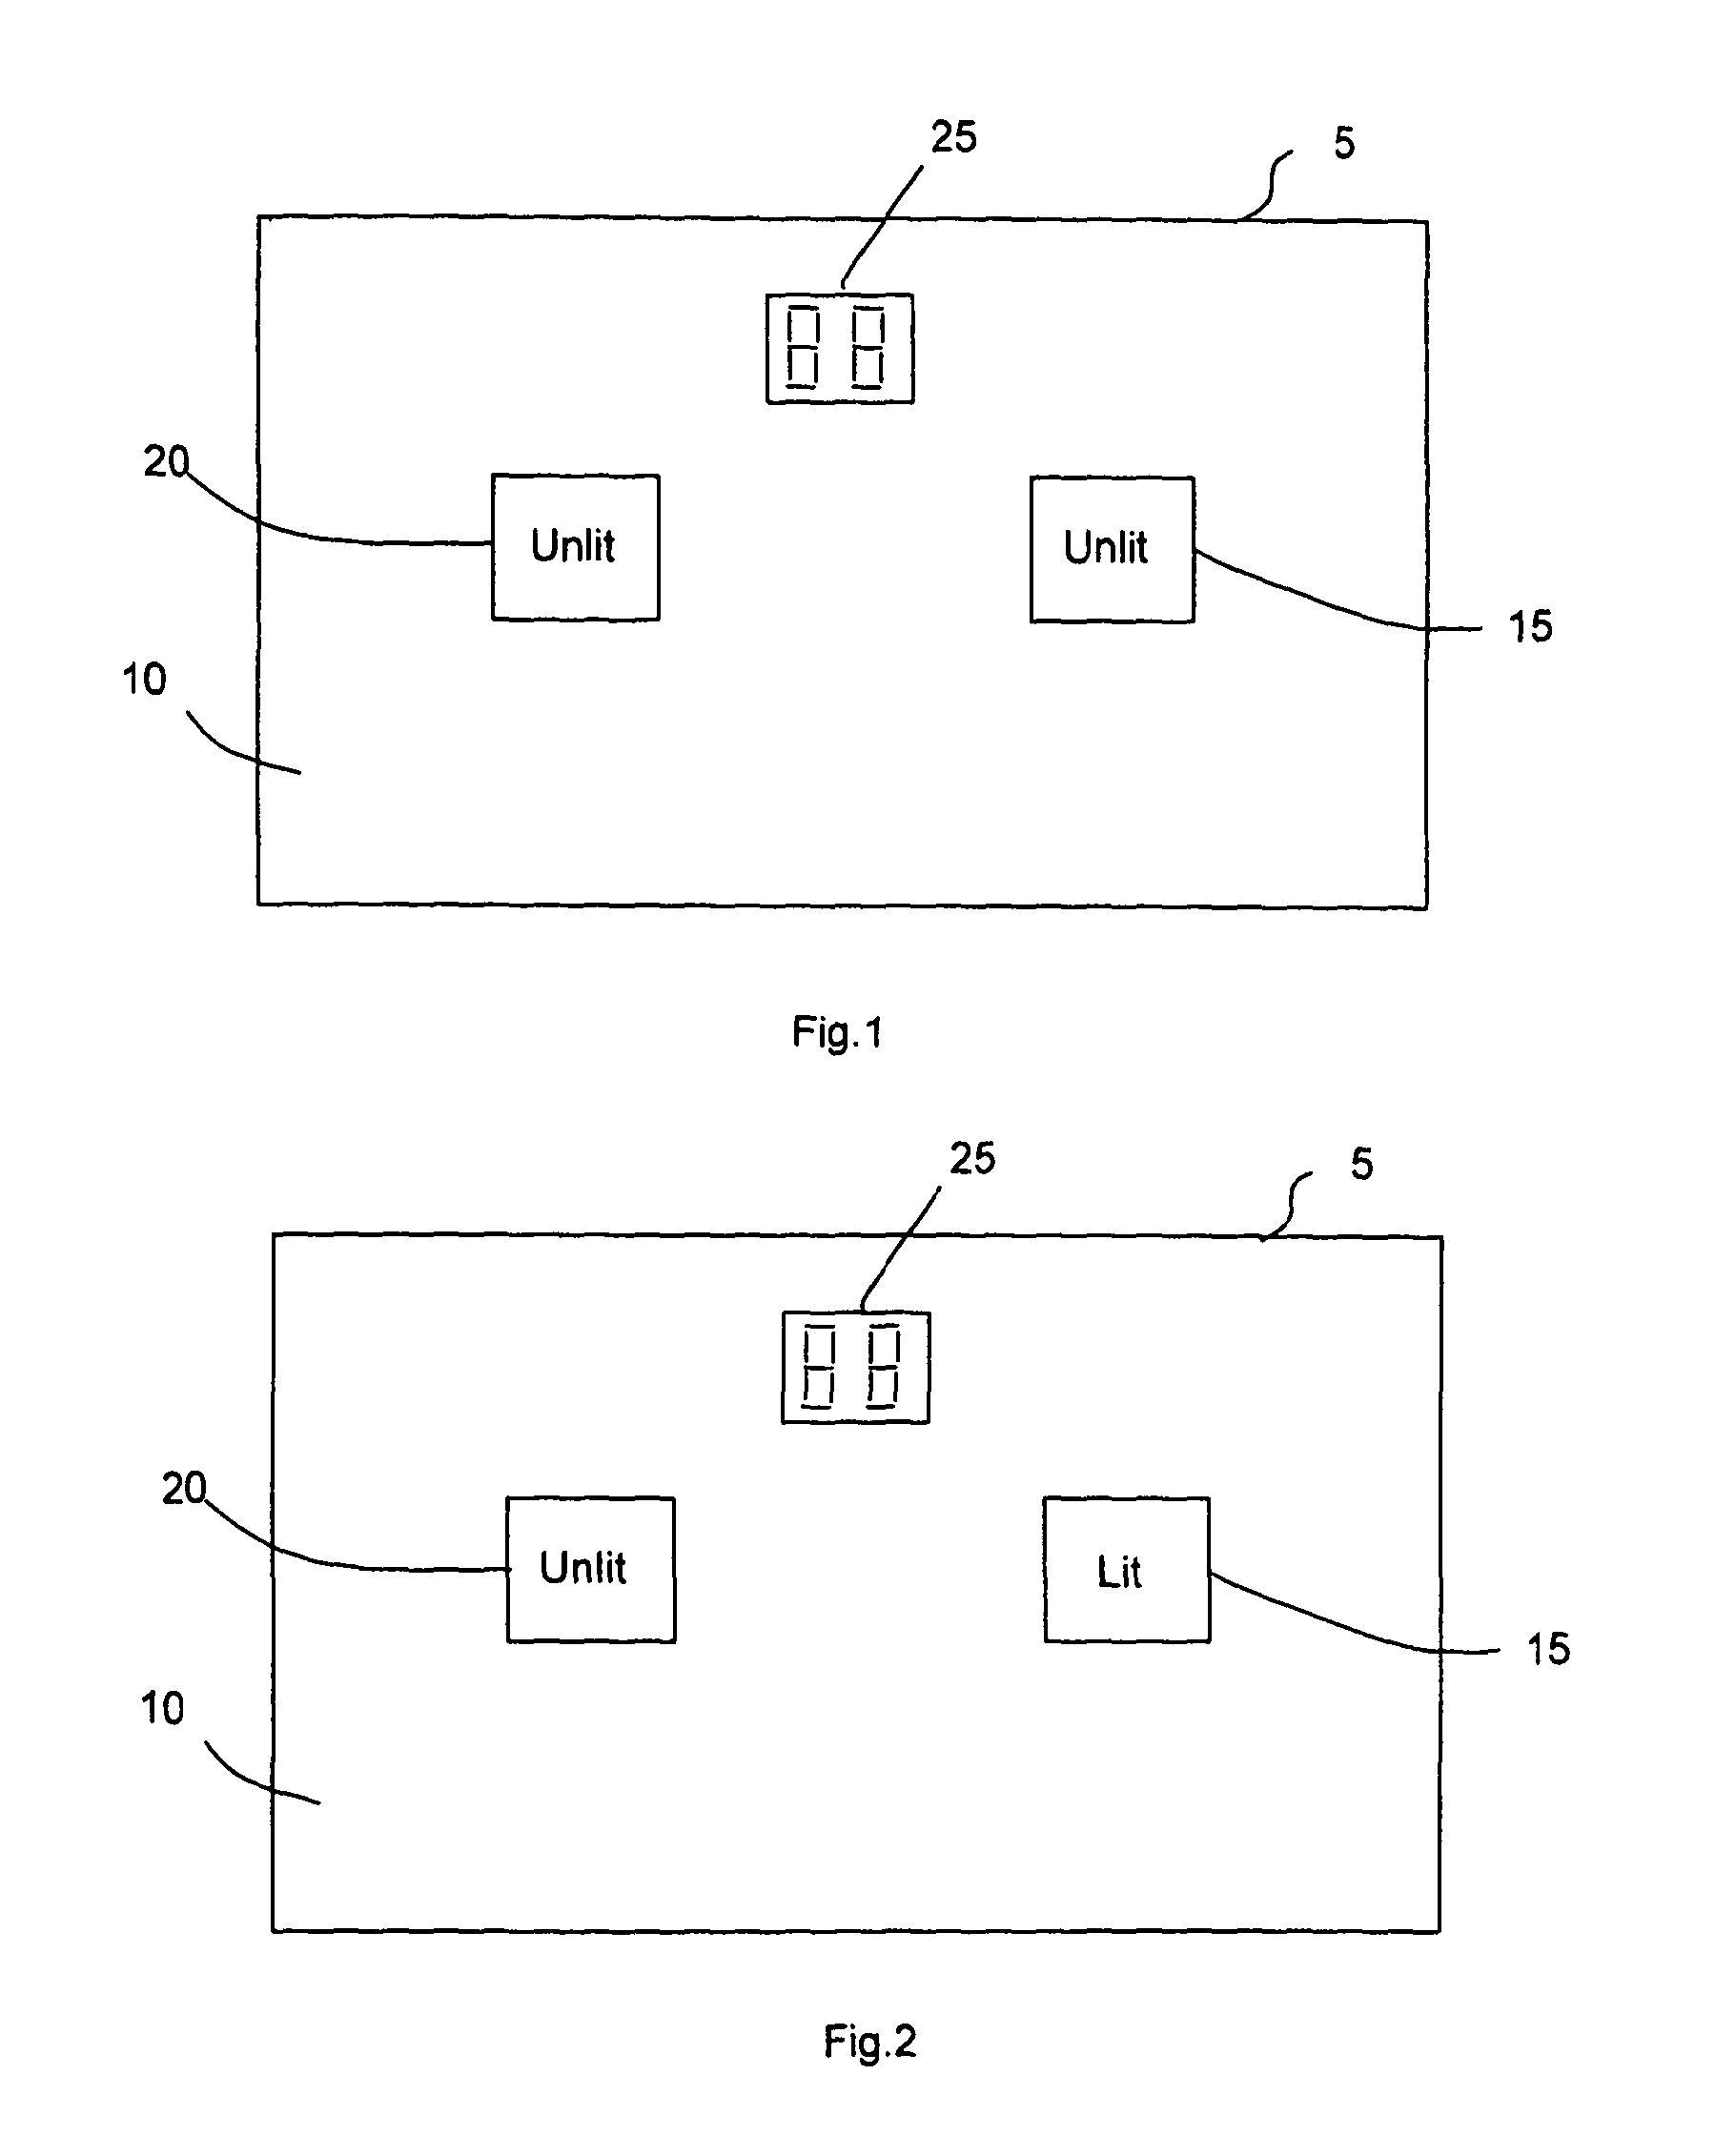 Apparatus and method for testing sustained attention and delerium